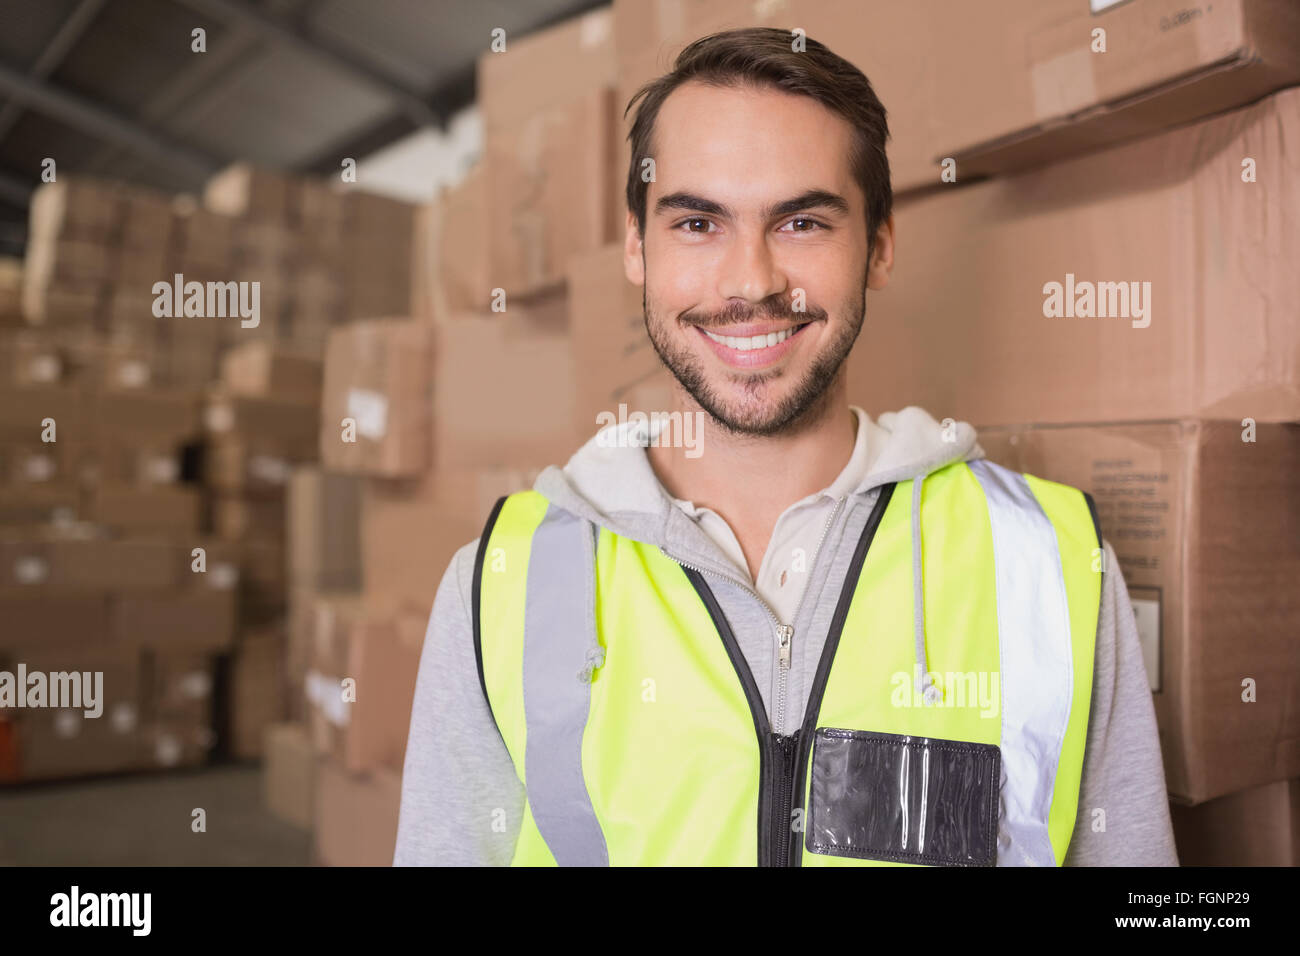 Smiling manual worker in warehouse Stock Photo